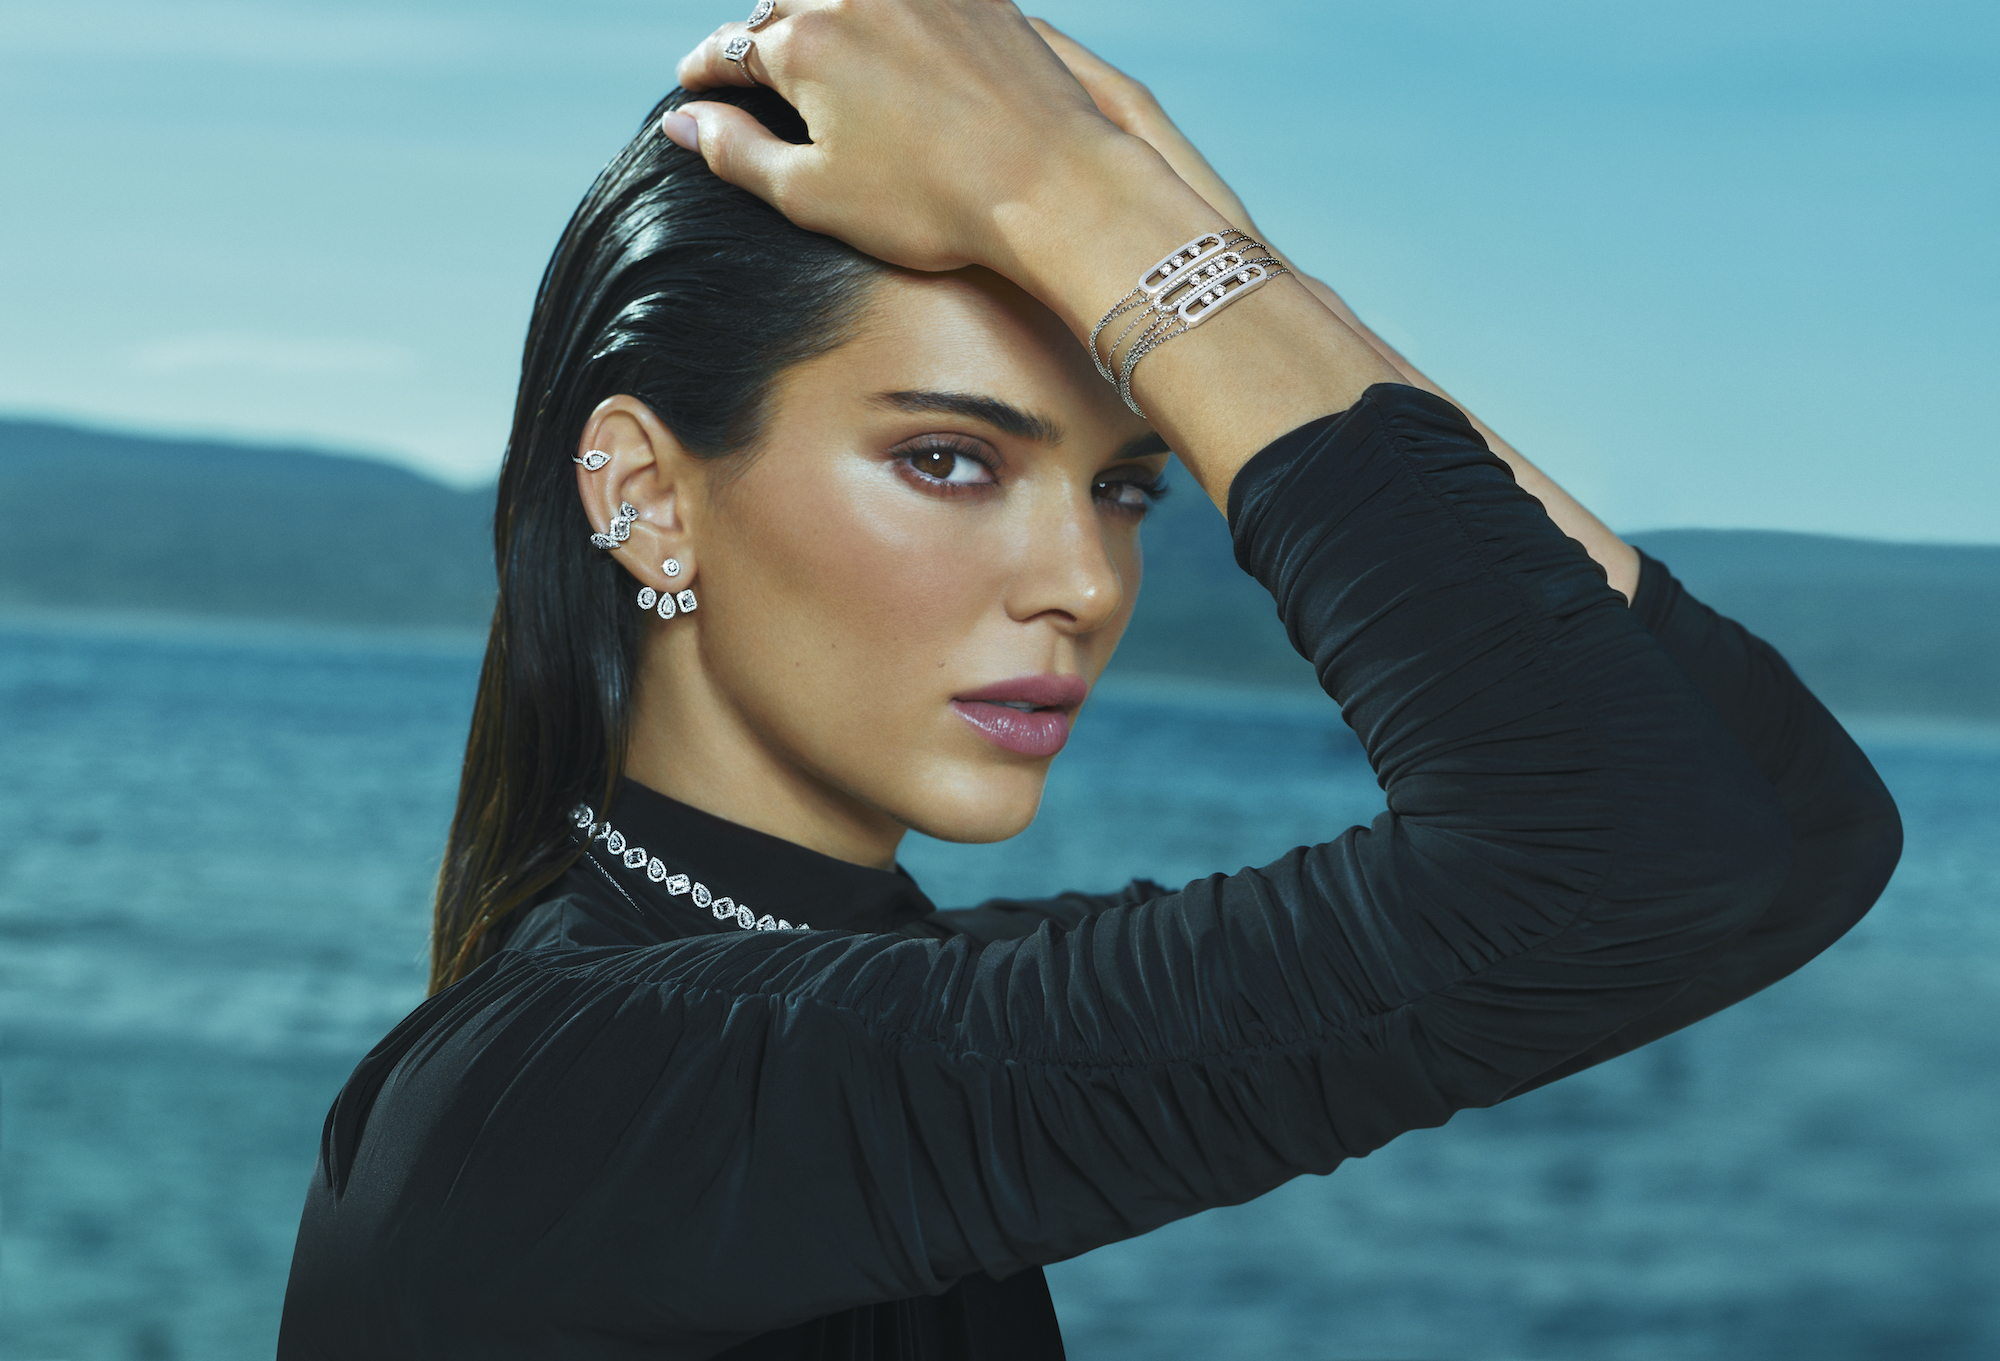 Kendall Jenner is the New Face of Jewelry Brand Messika - Only Natural  Diamonds